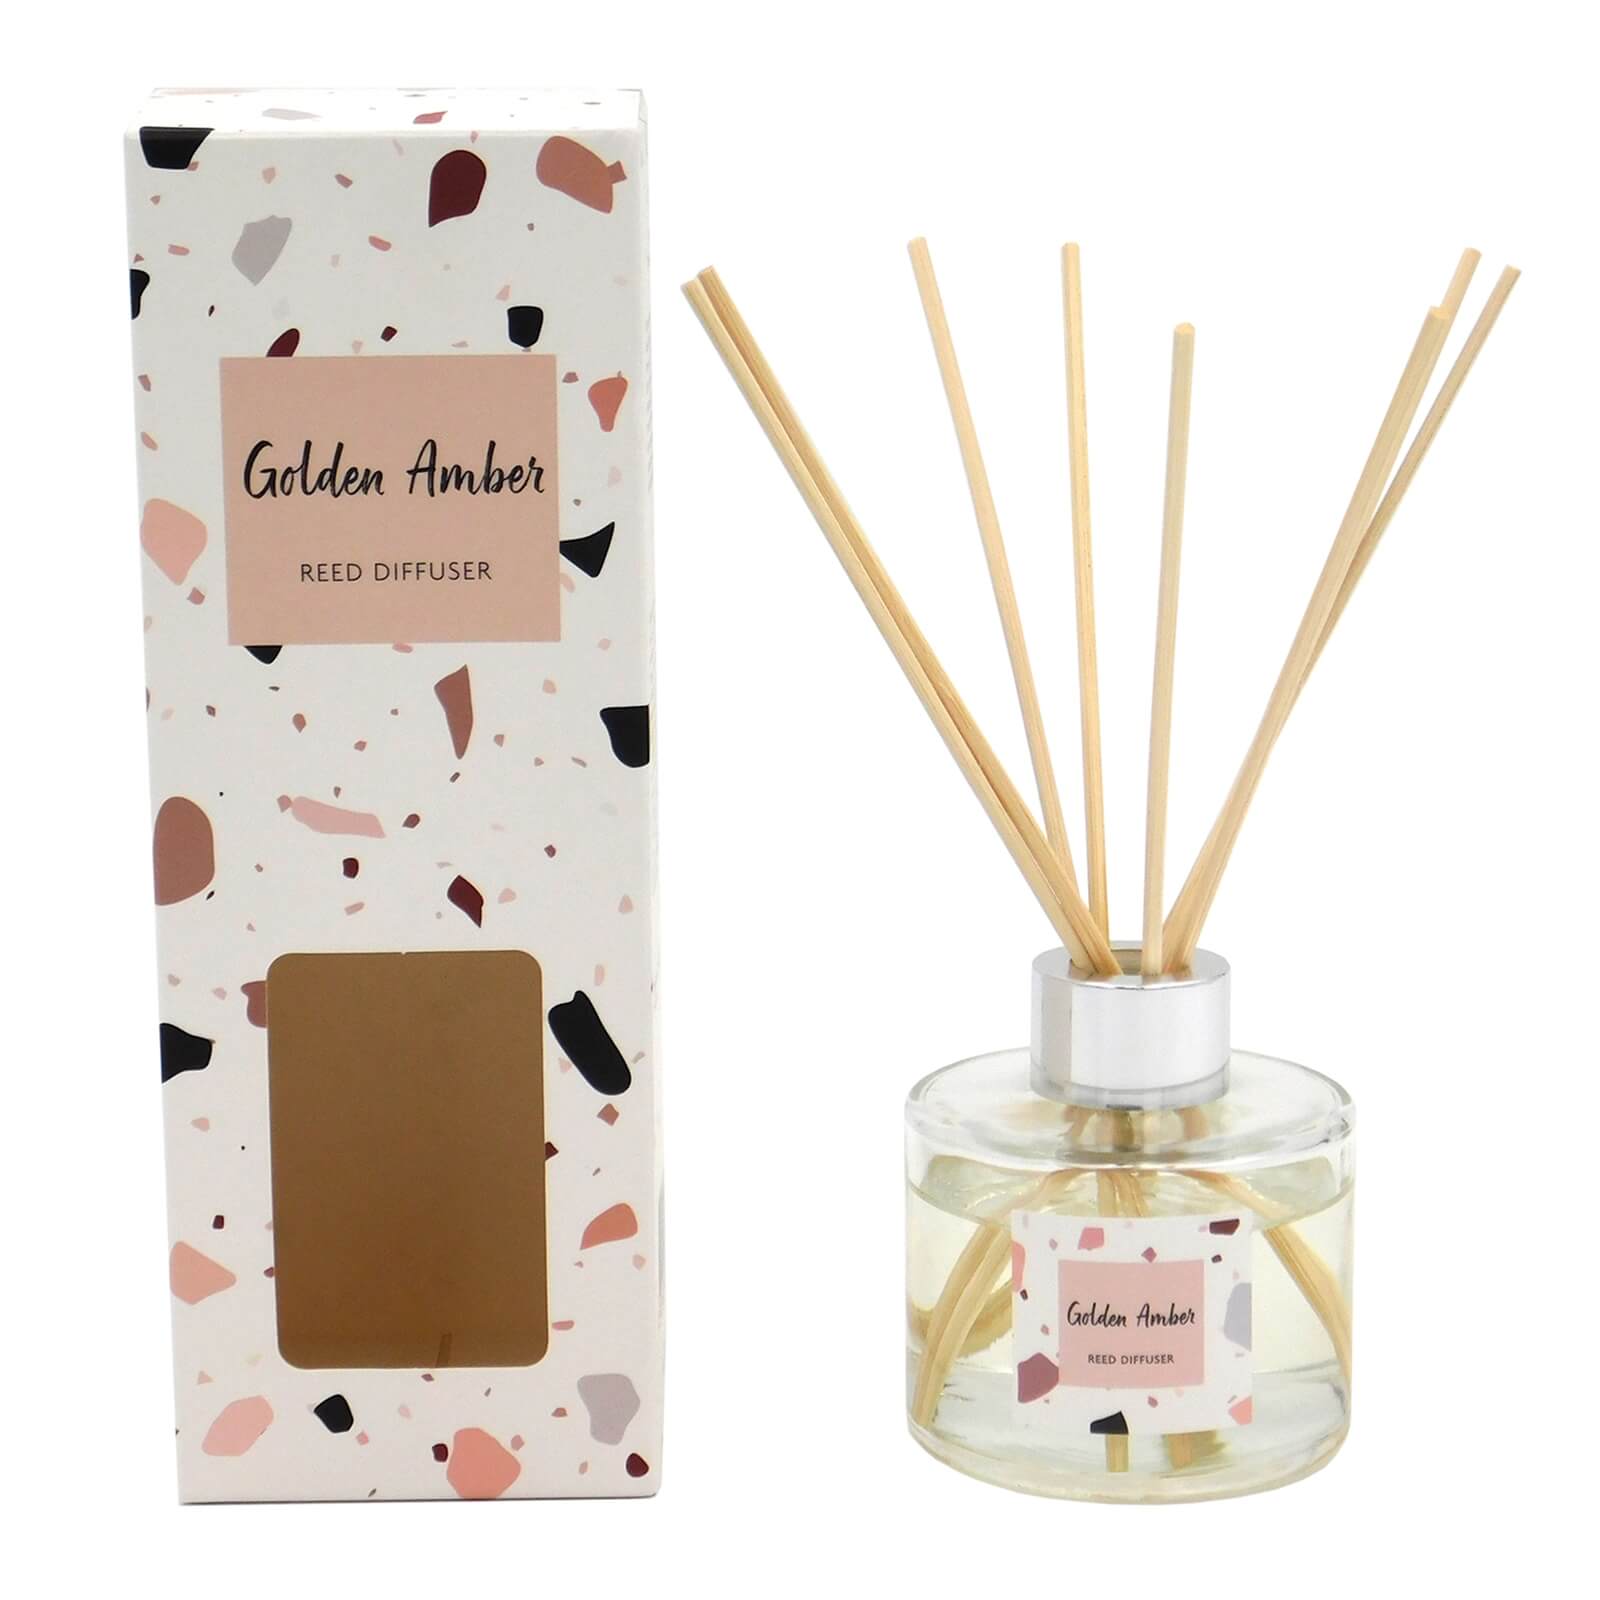 Pioneer Reed Diffuser - Golden Amber